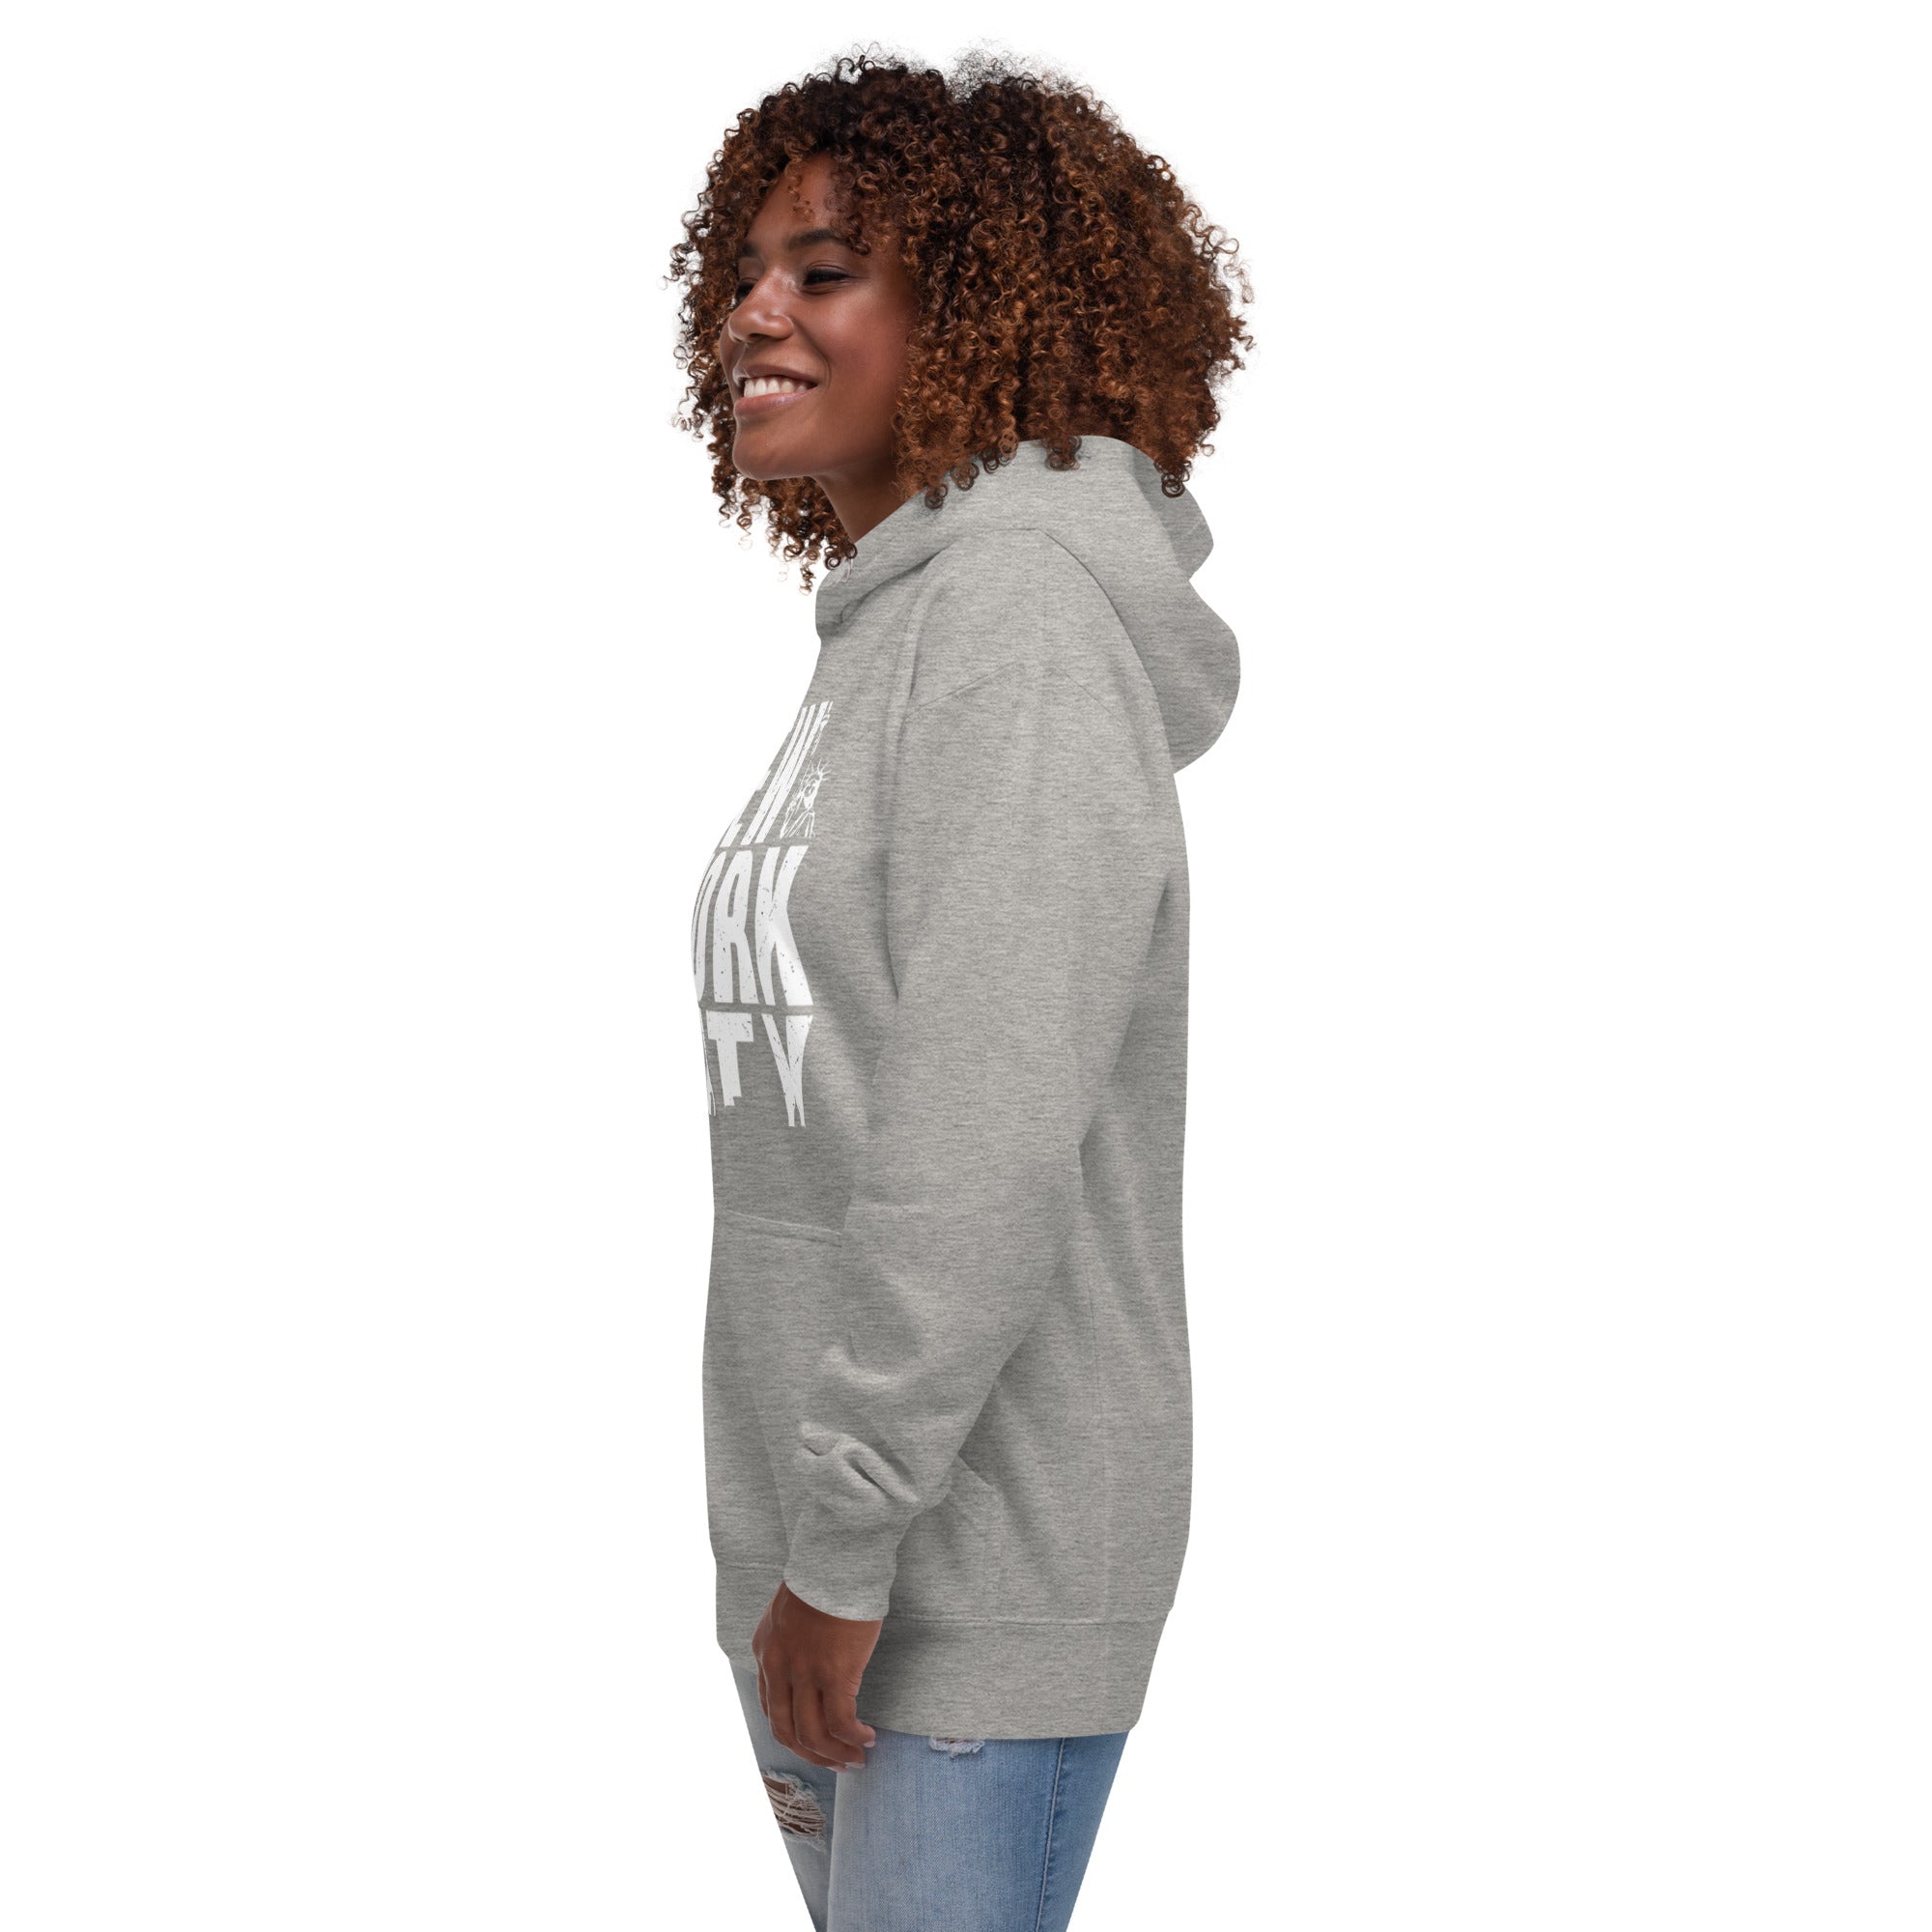 Unisex Hoodie, NY City, Size From S to 3X